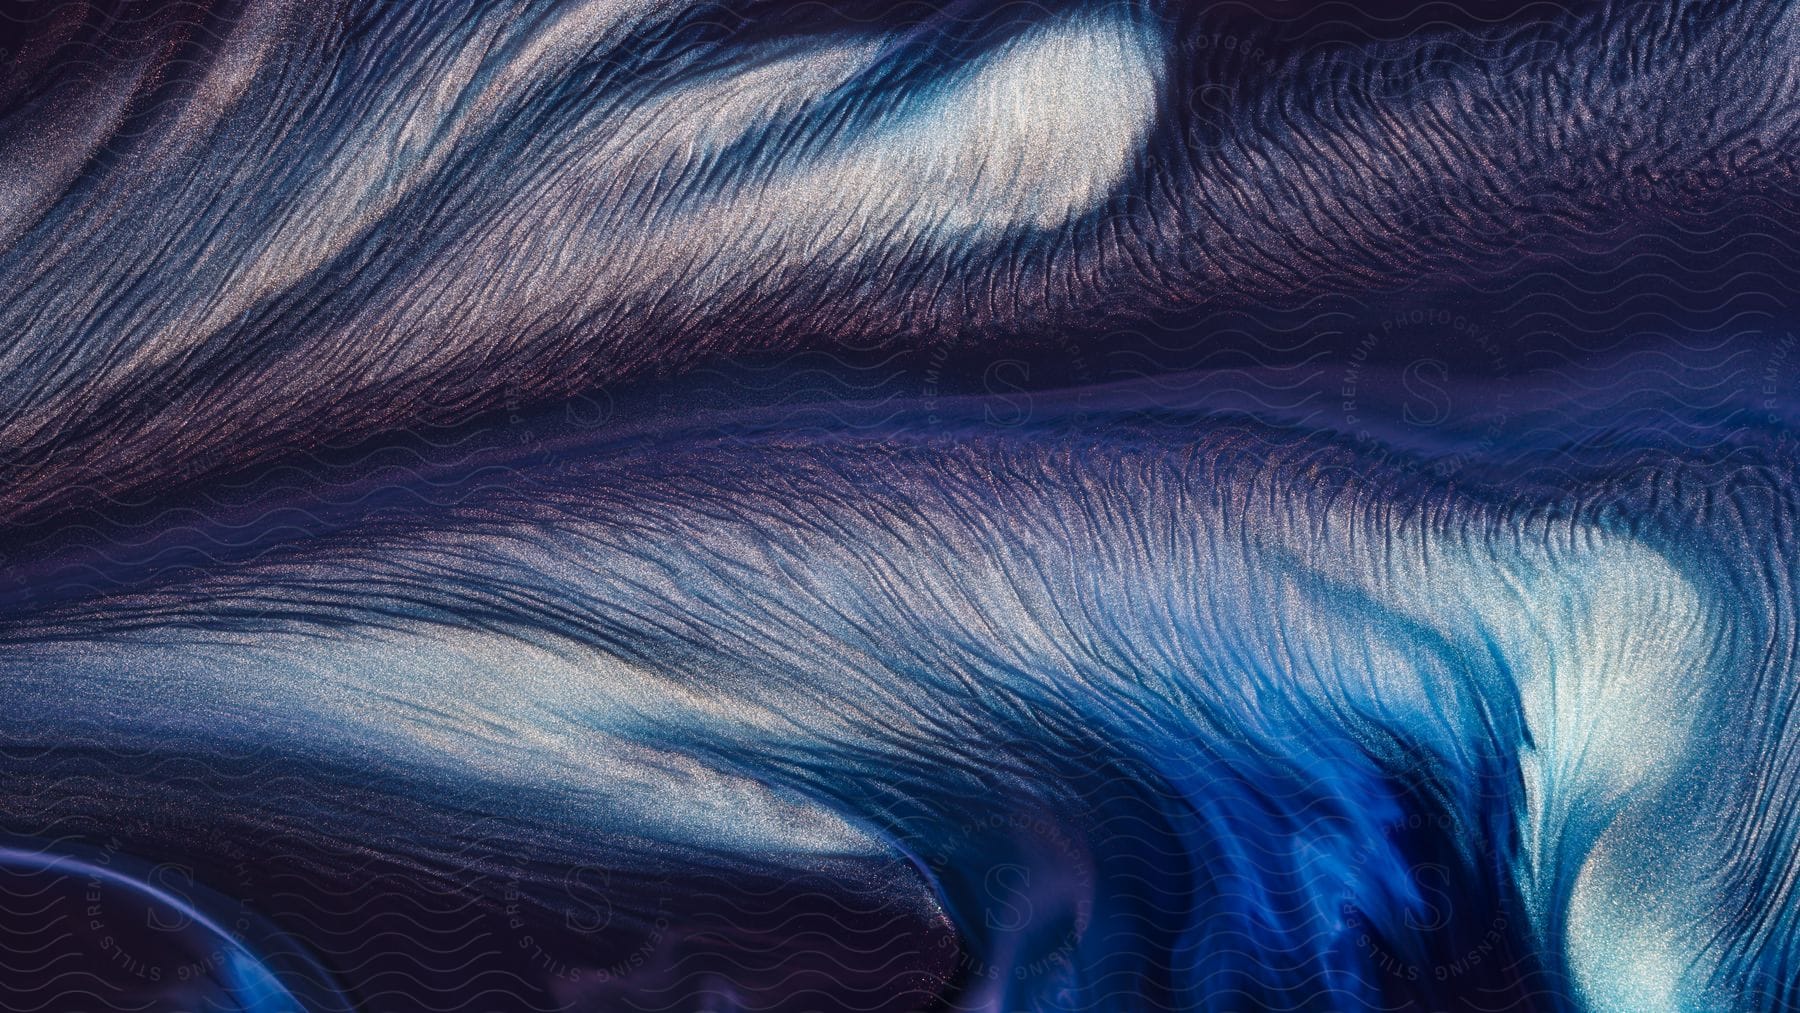 Tiny hairs on the stem of a blue white and purple feather